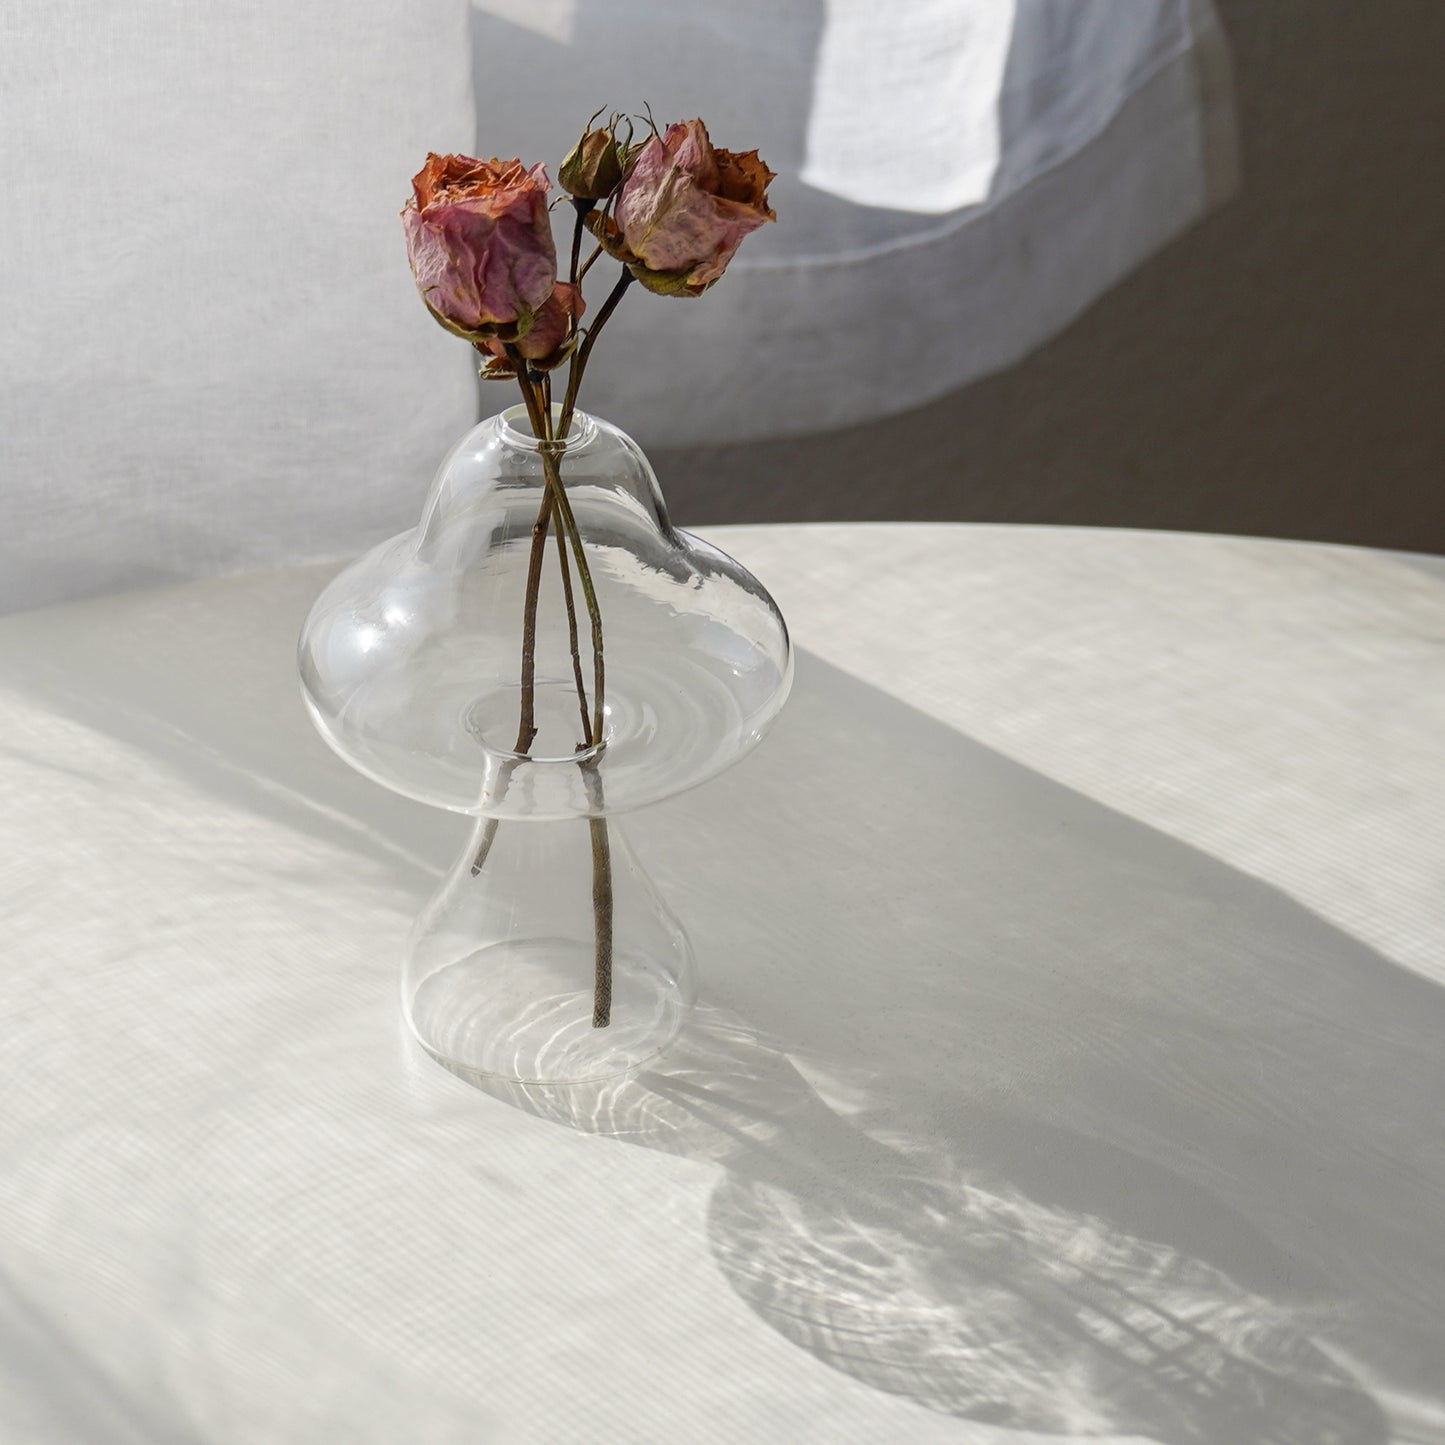 pink dried roses in a clear mushroom-shaped vase placed on a white round table by the window